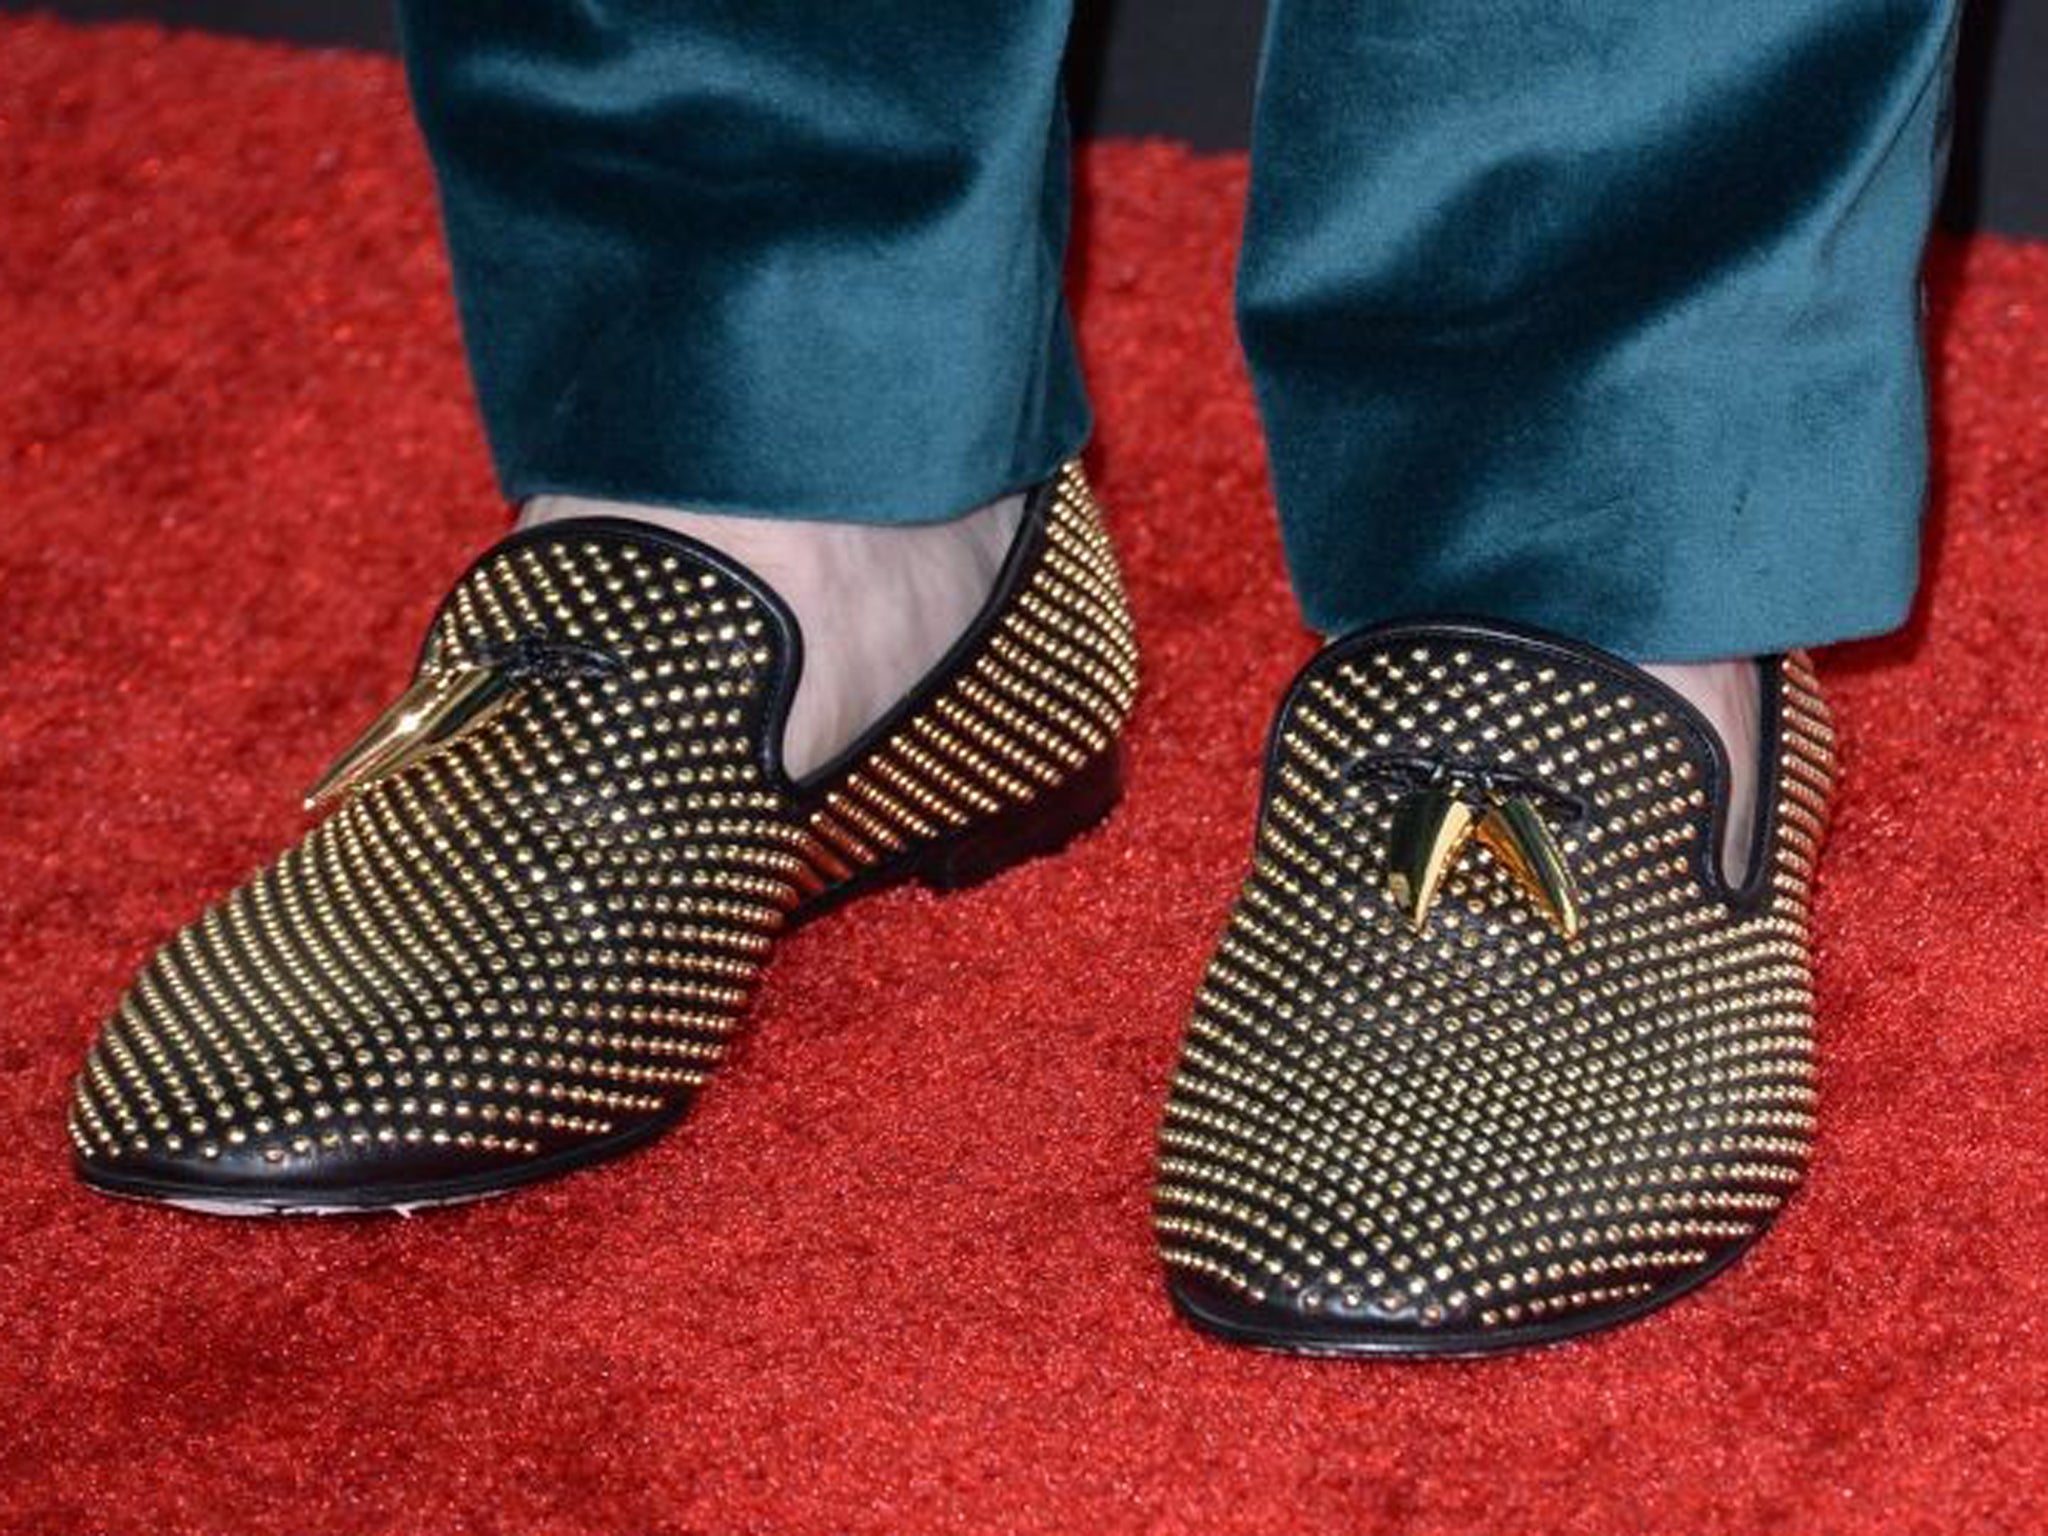 The shoes of rapper Macklemore at the Grammys